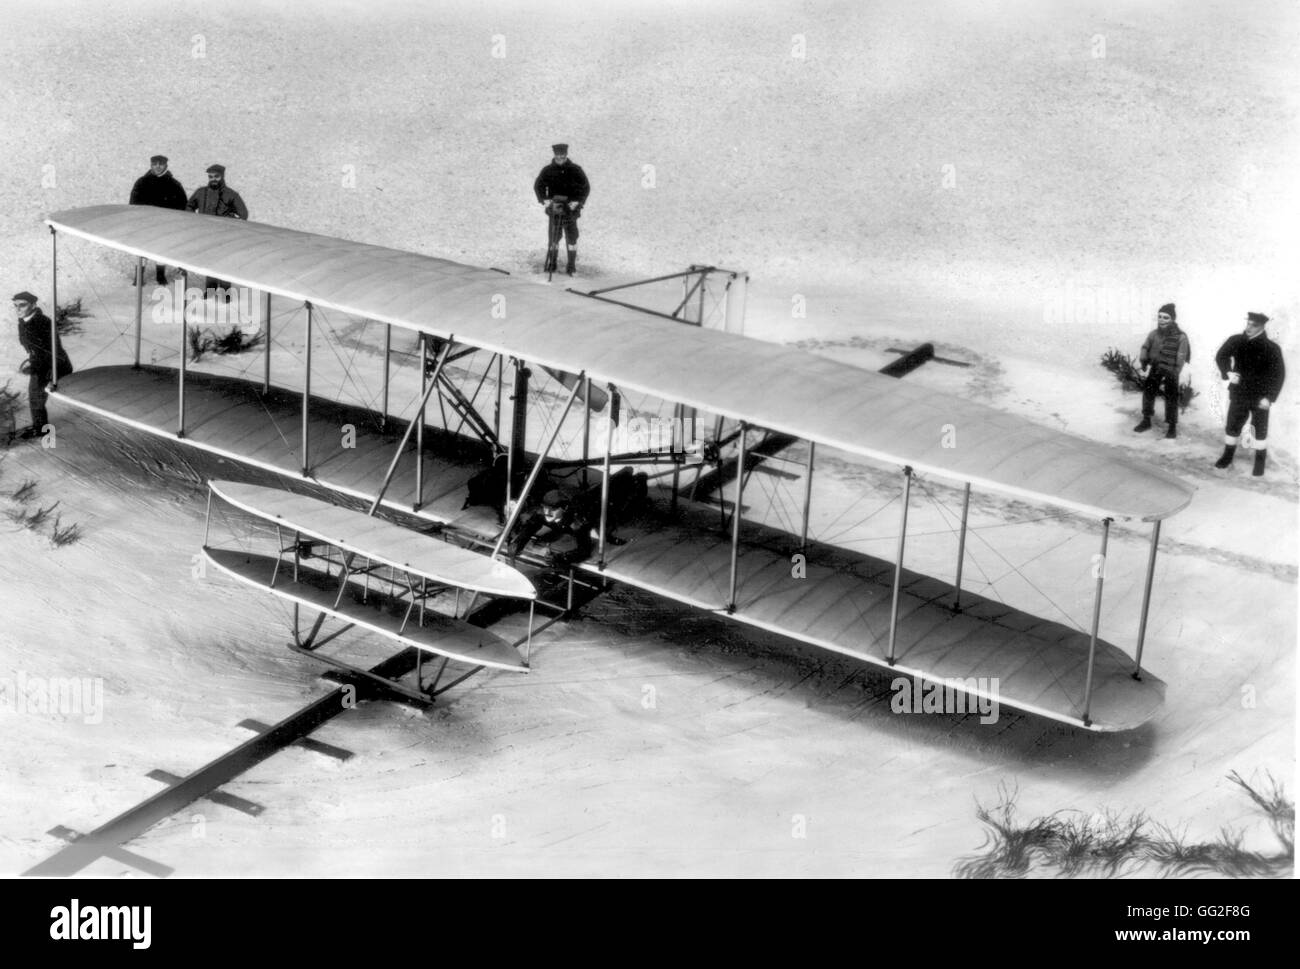 A Wright biplane whose maiden flight took place on December 17, 1903 20thC Stock Photo